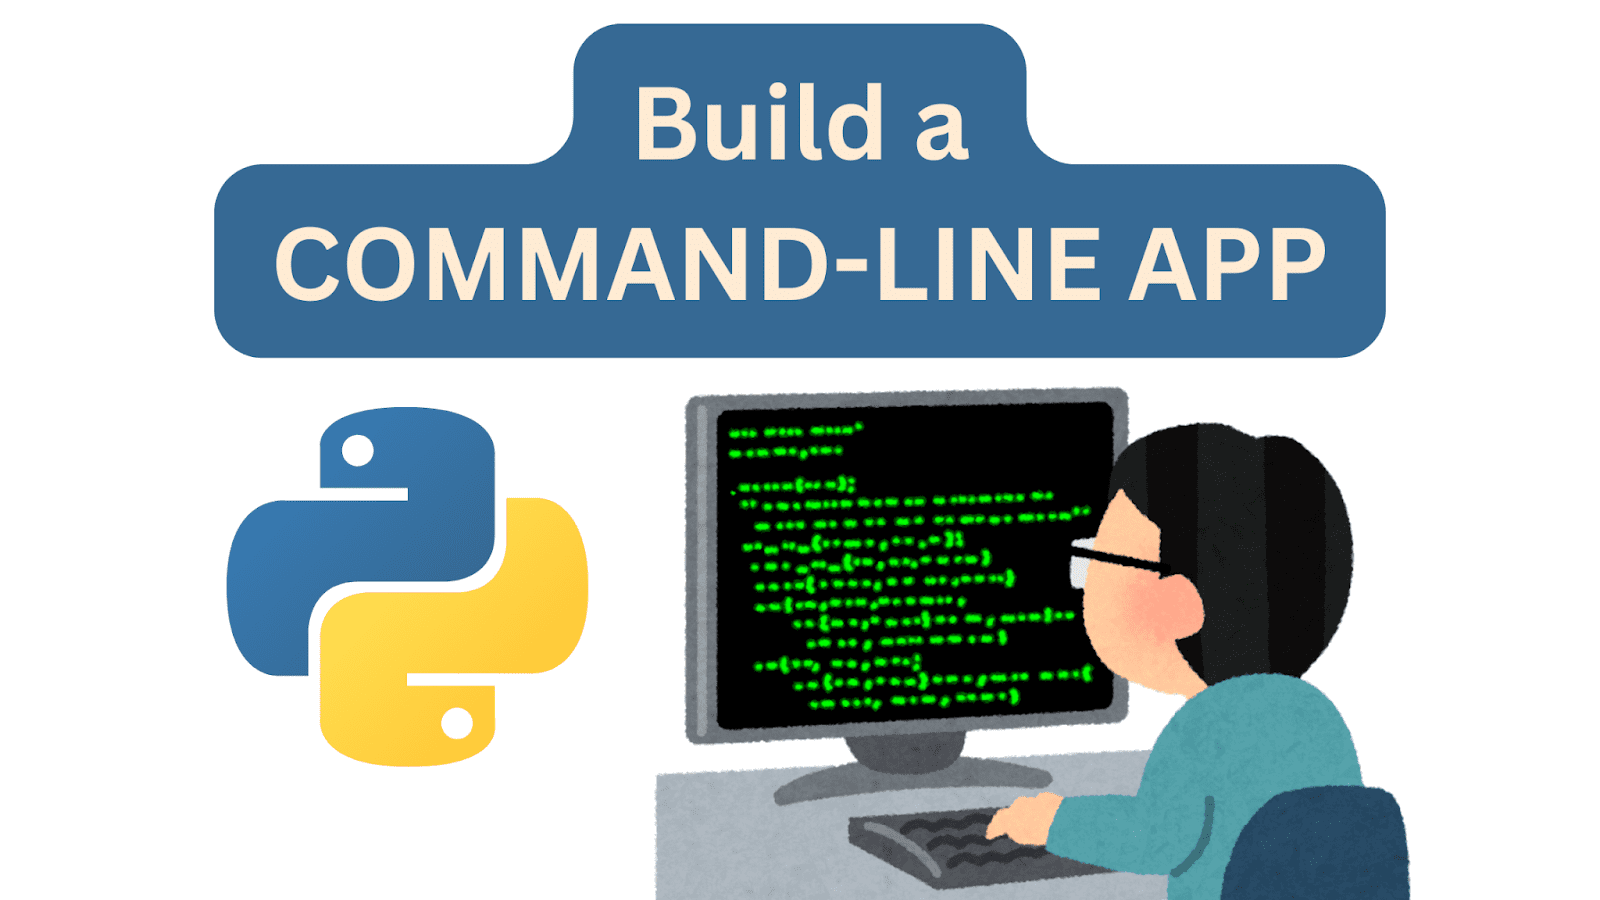 Build a Command-Line App with Python in 7 Easy Steps